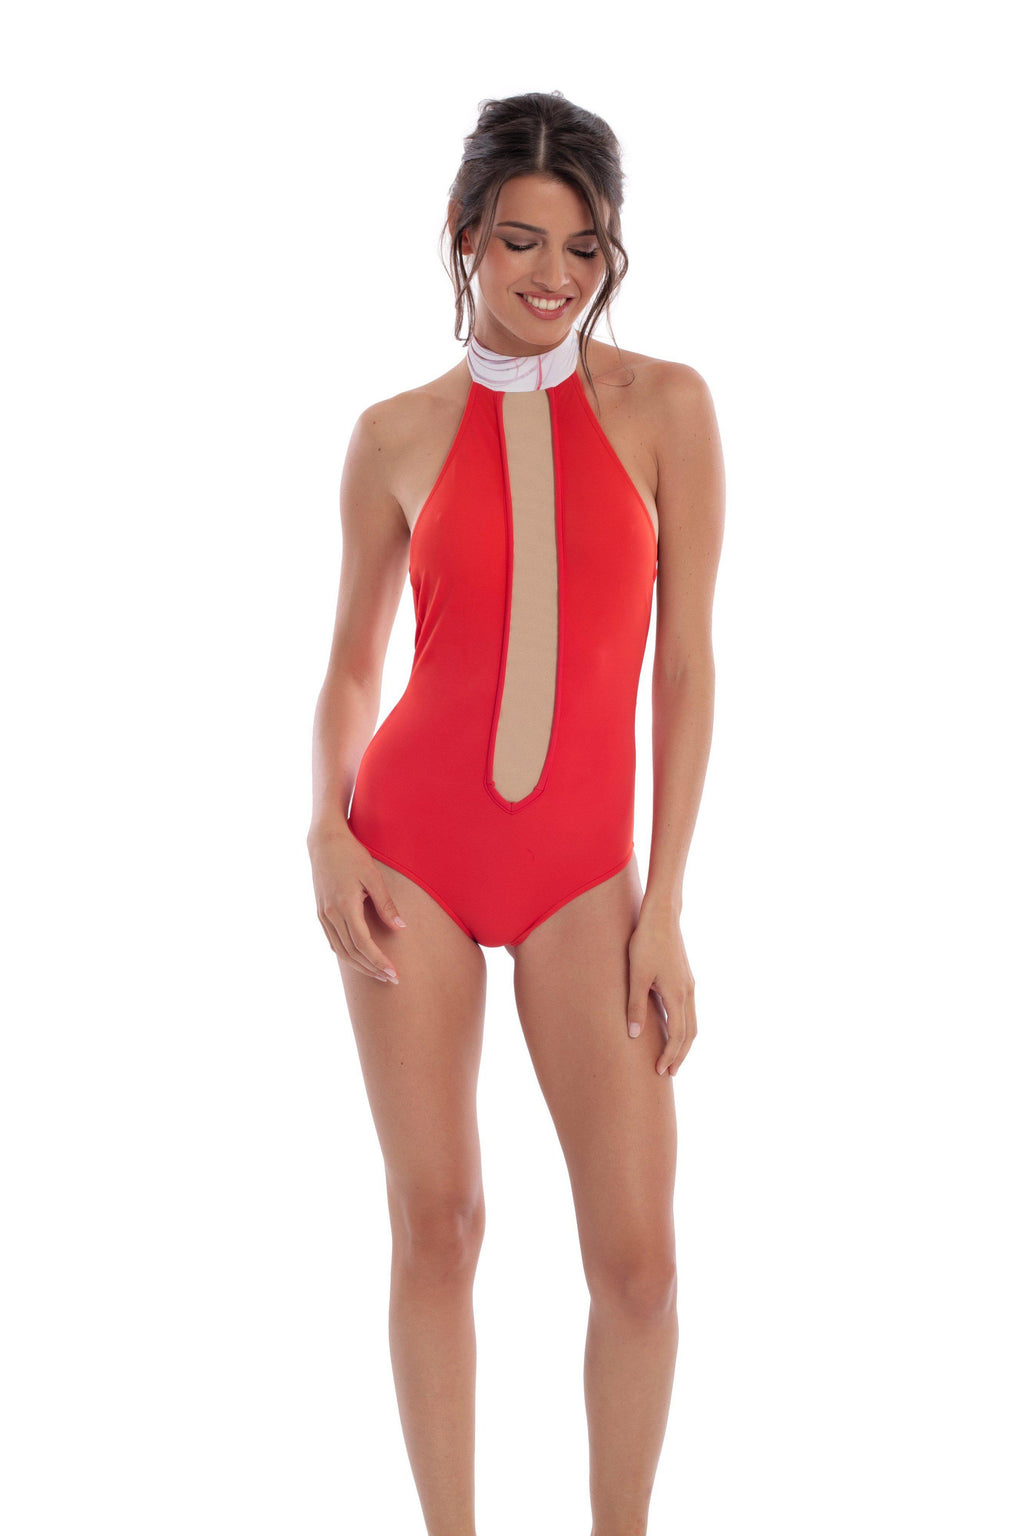 REVEL REY PLUMAGE ONE PIECE IN CHILI-One pieces-The Beach Edit